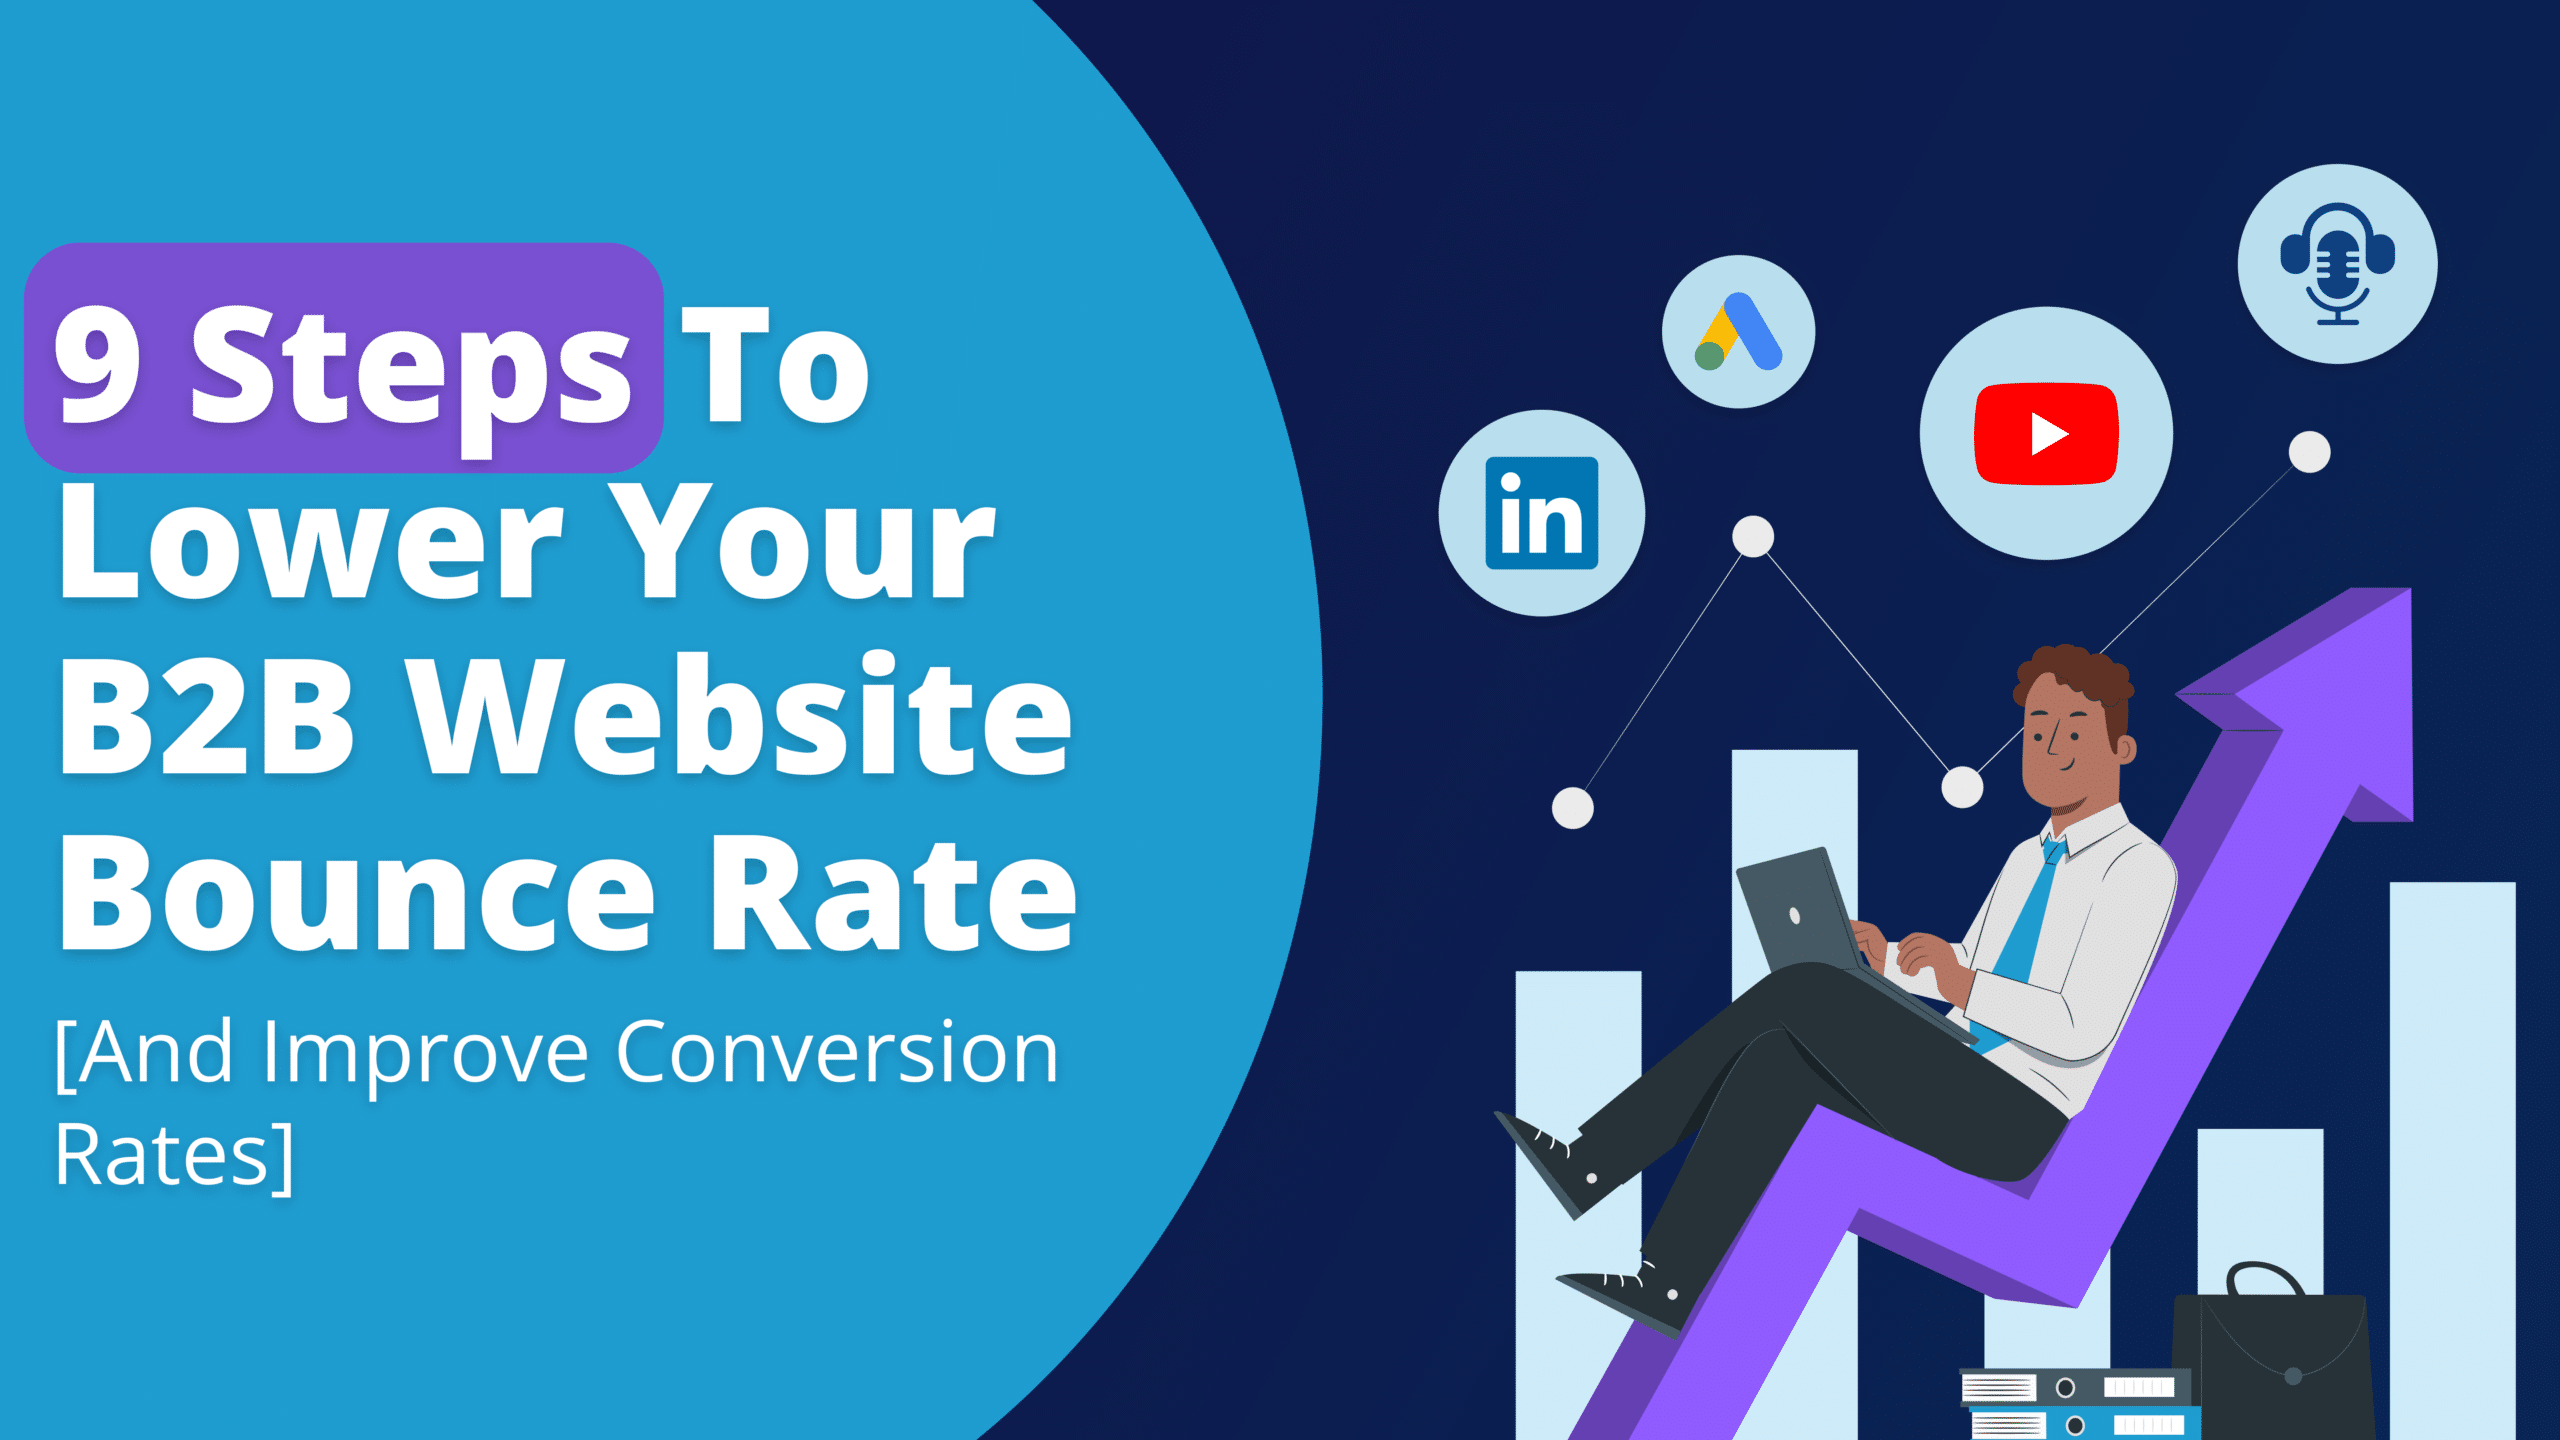 9 Steps To Lower Your B2B Website Bounce Rate [And Improve Conversion Rates]